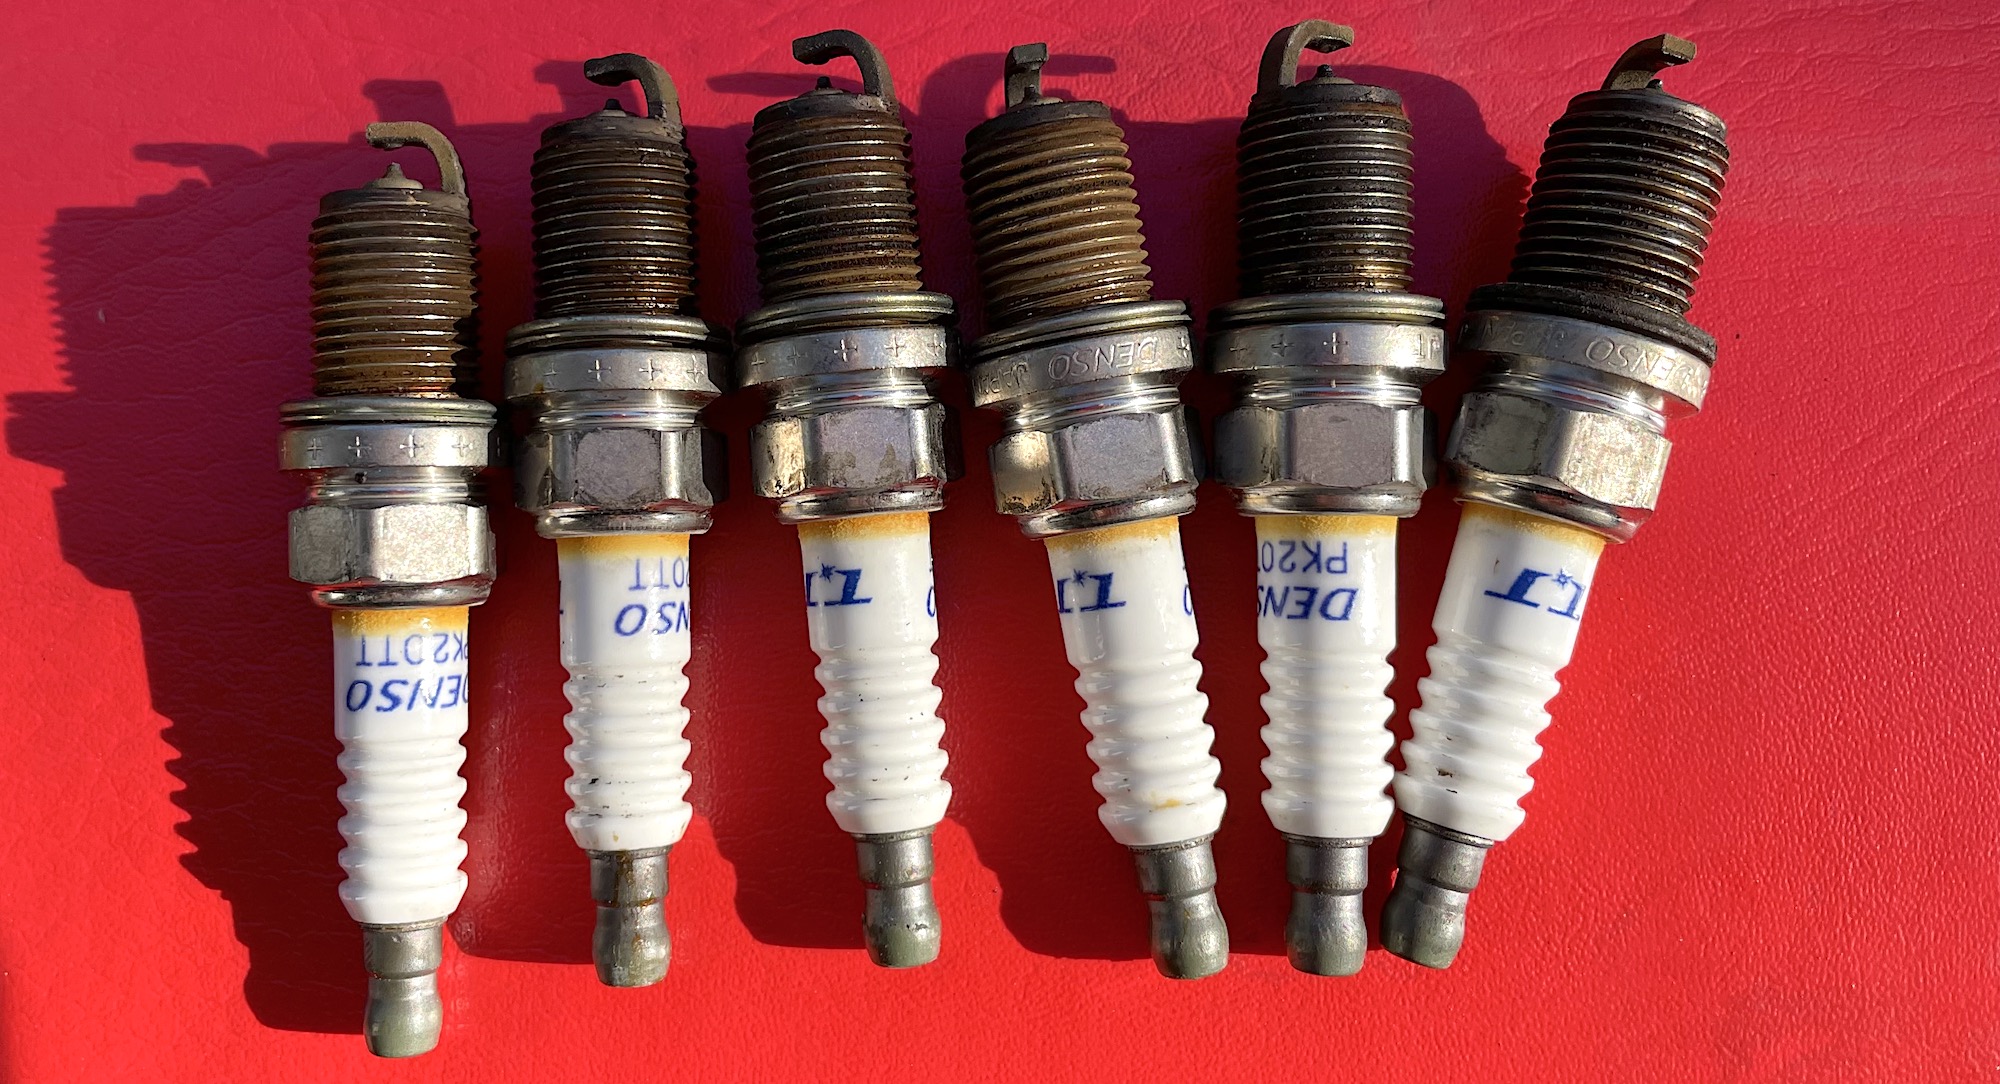 Here's how often you should change your spark plugs